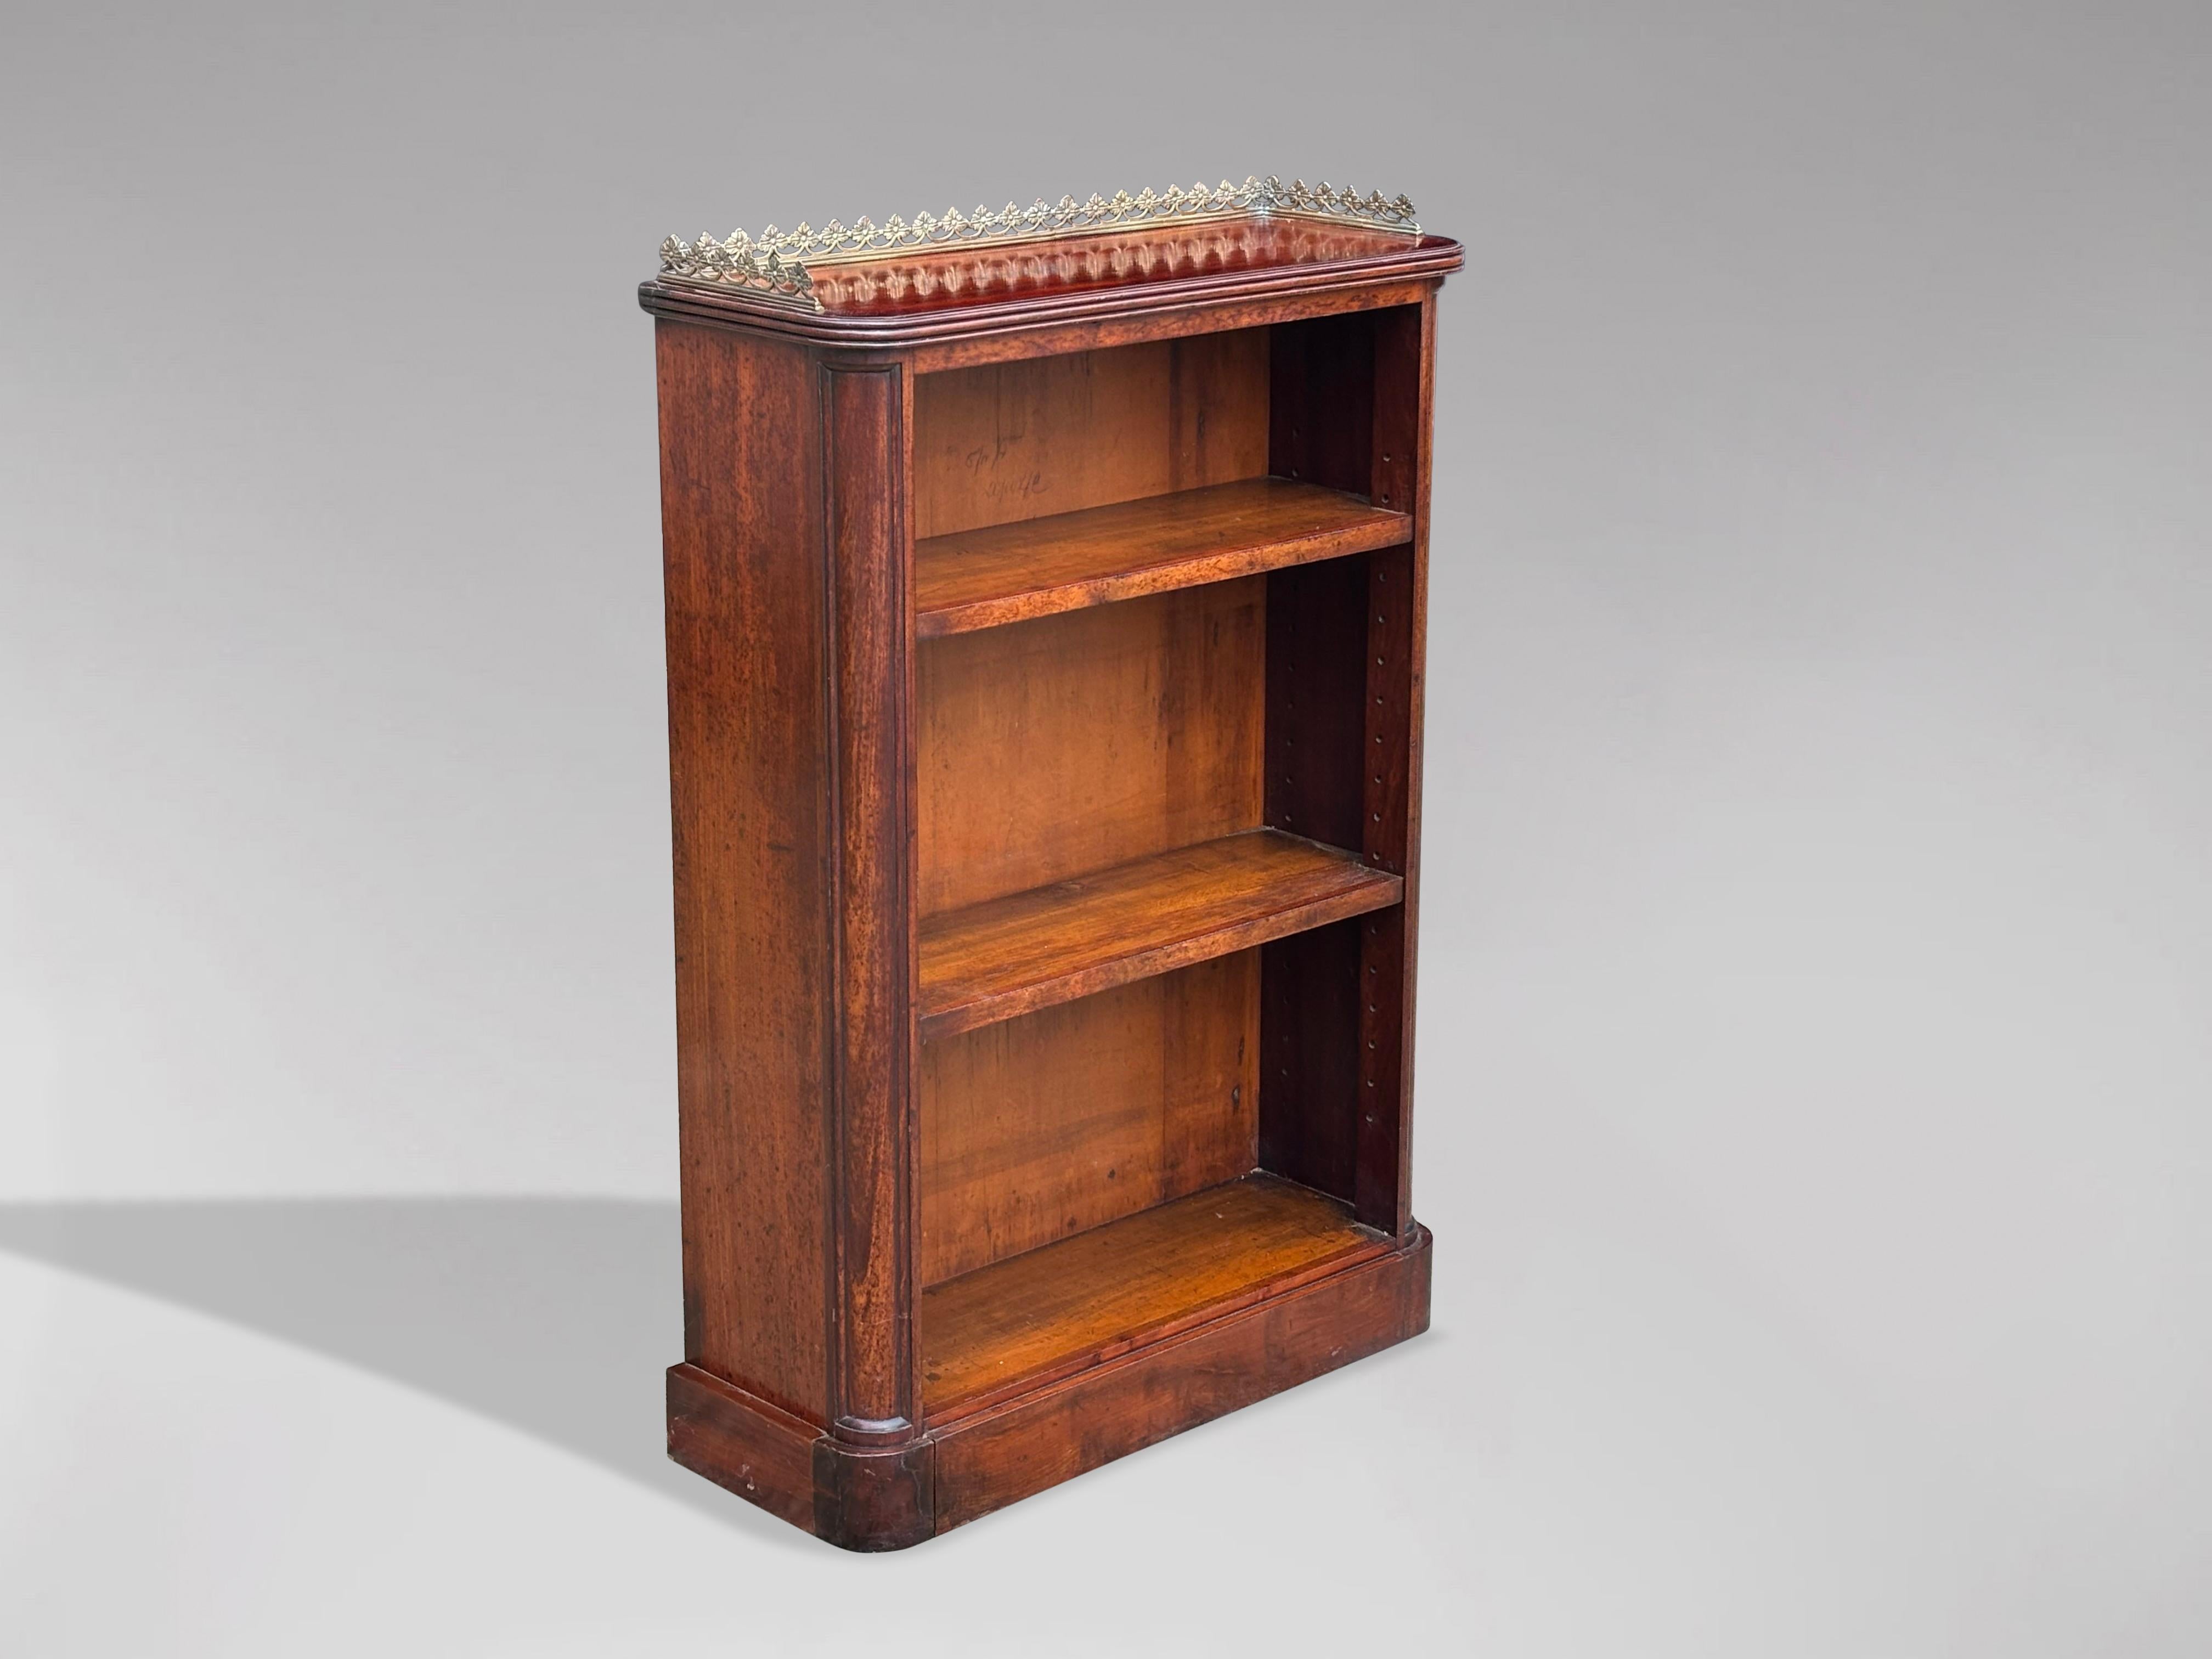 A small fine 19th century William IV period solid mahogany open low library bookcase. The rectangular well figured mahogany moulded rounded top surmounted by an ornate fretted brass gallery, above two adjustable shelves, flanked by rounded mahogany